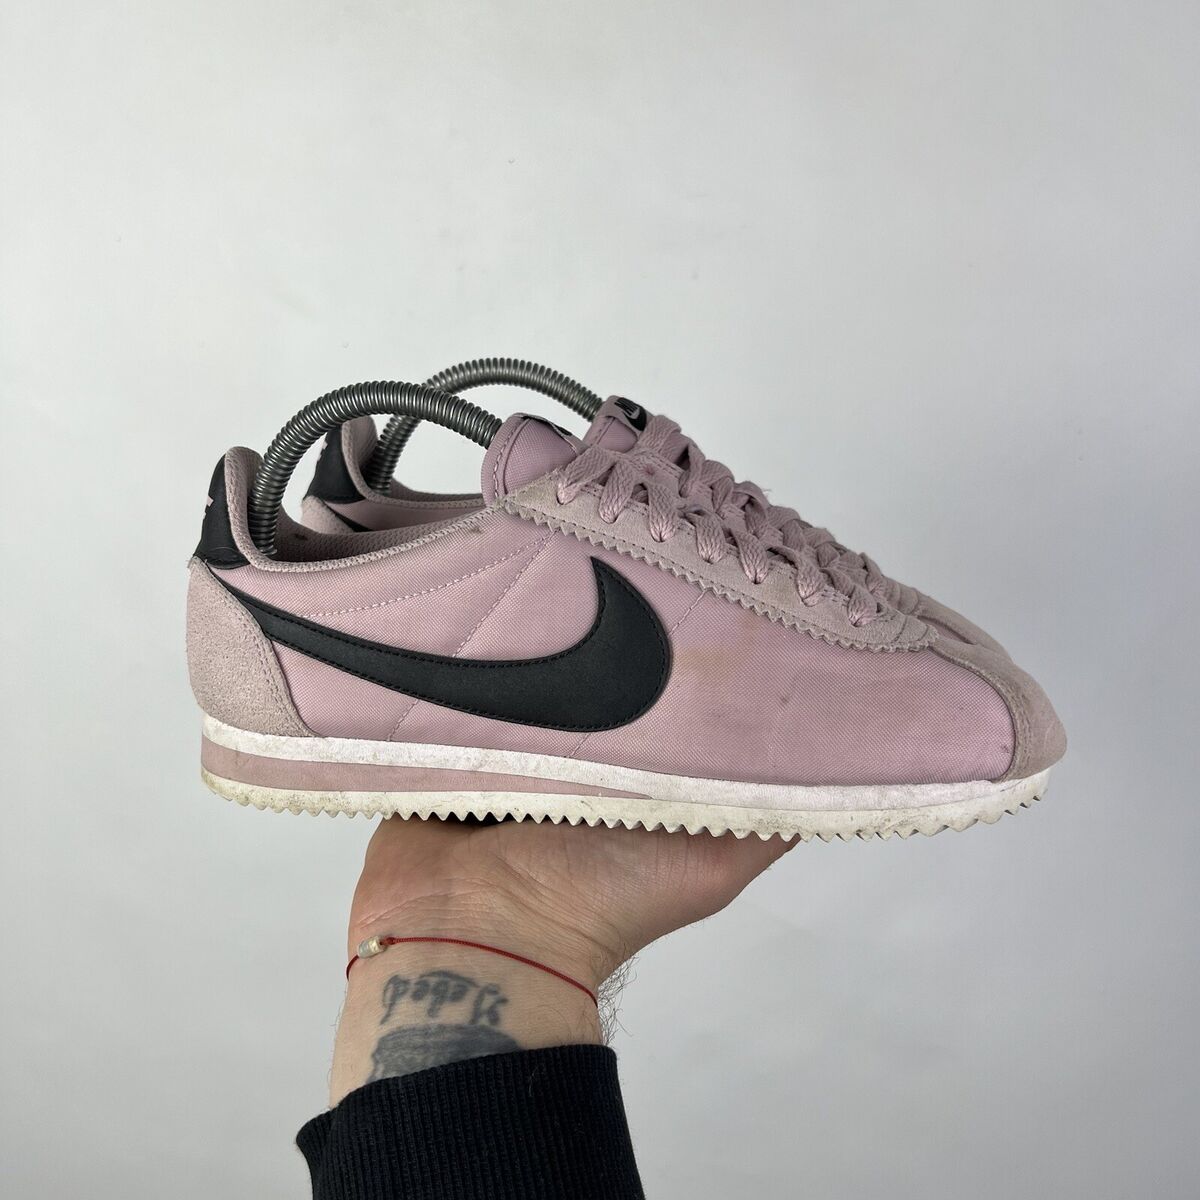 Buy Nike Cortez - All releases at a glance at grailify.com